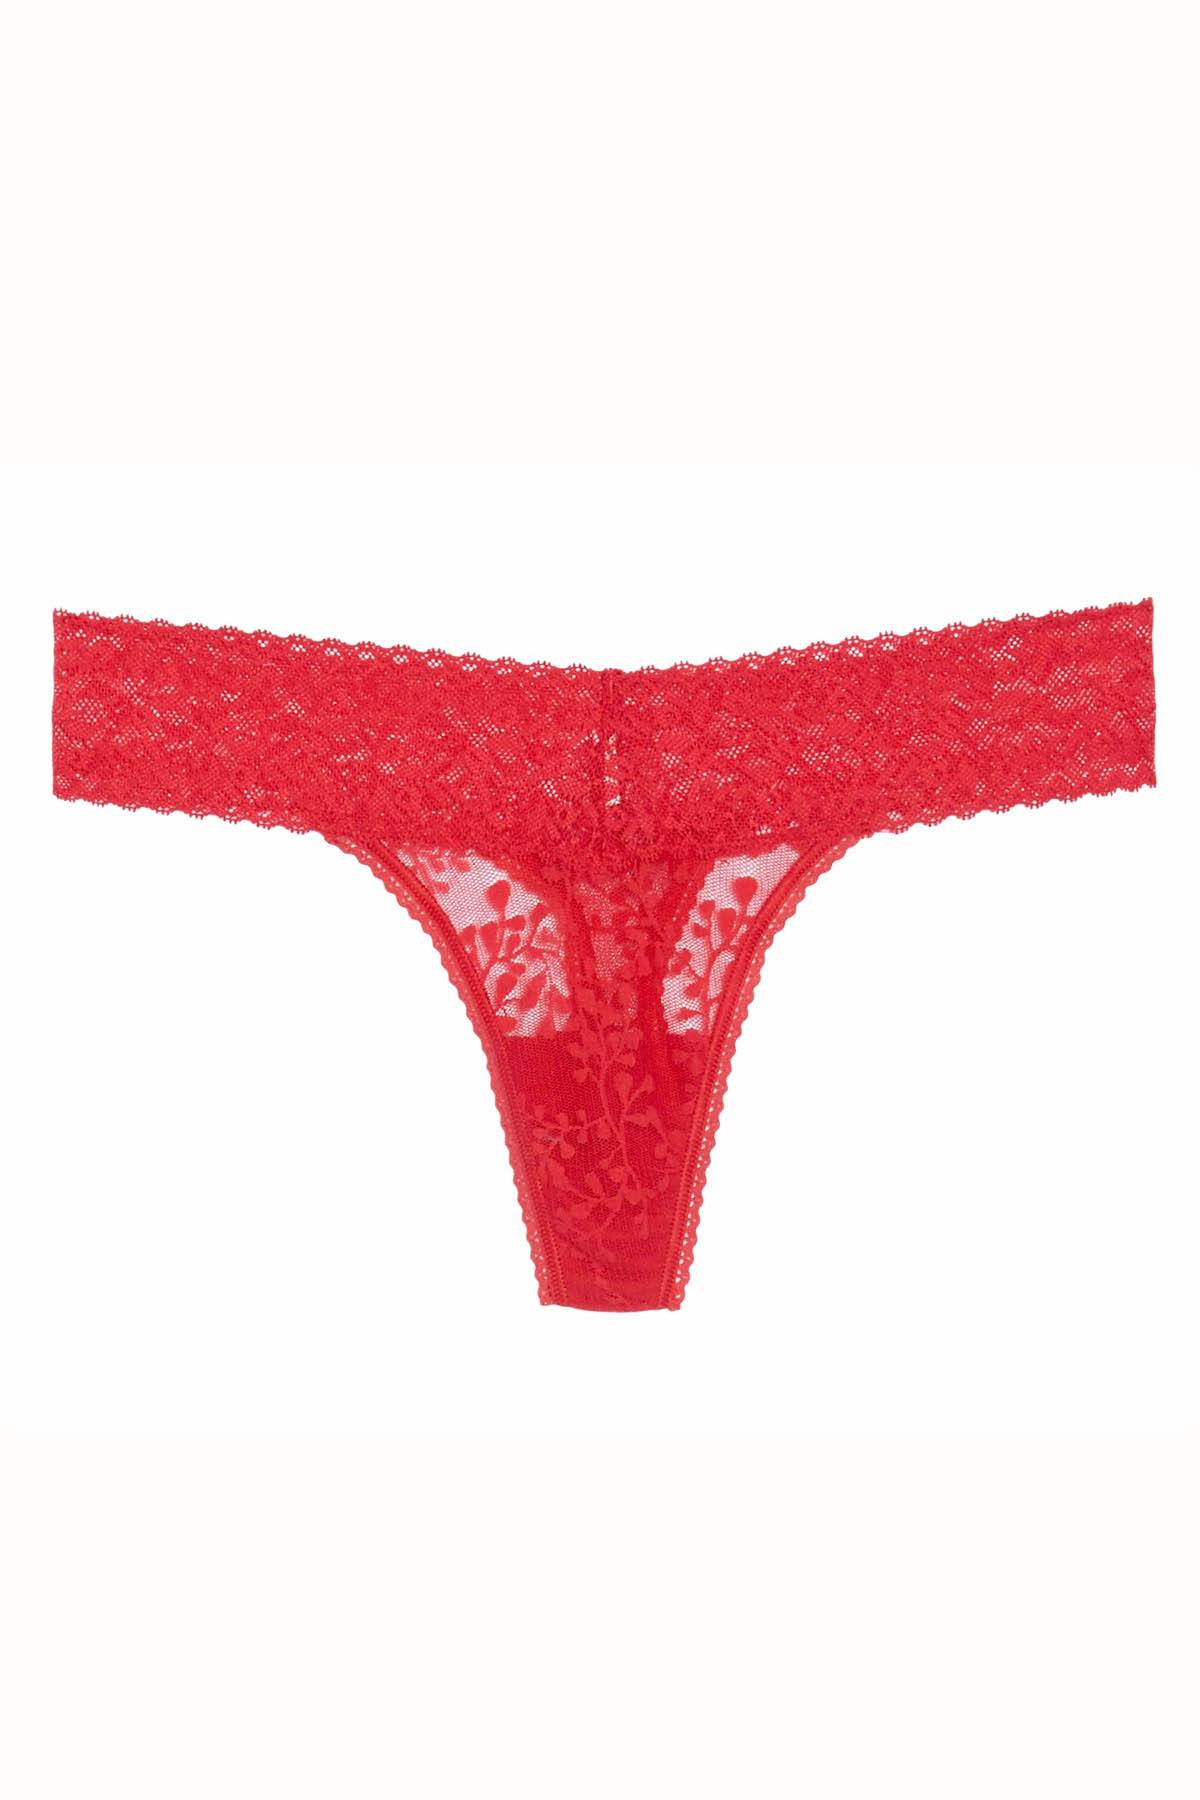 Calvin Klein Empower-Red Bare Lace Thong